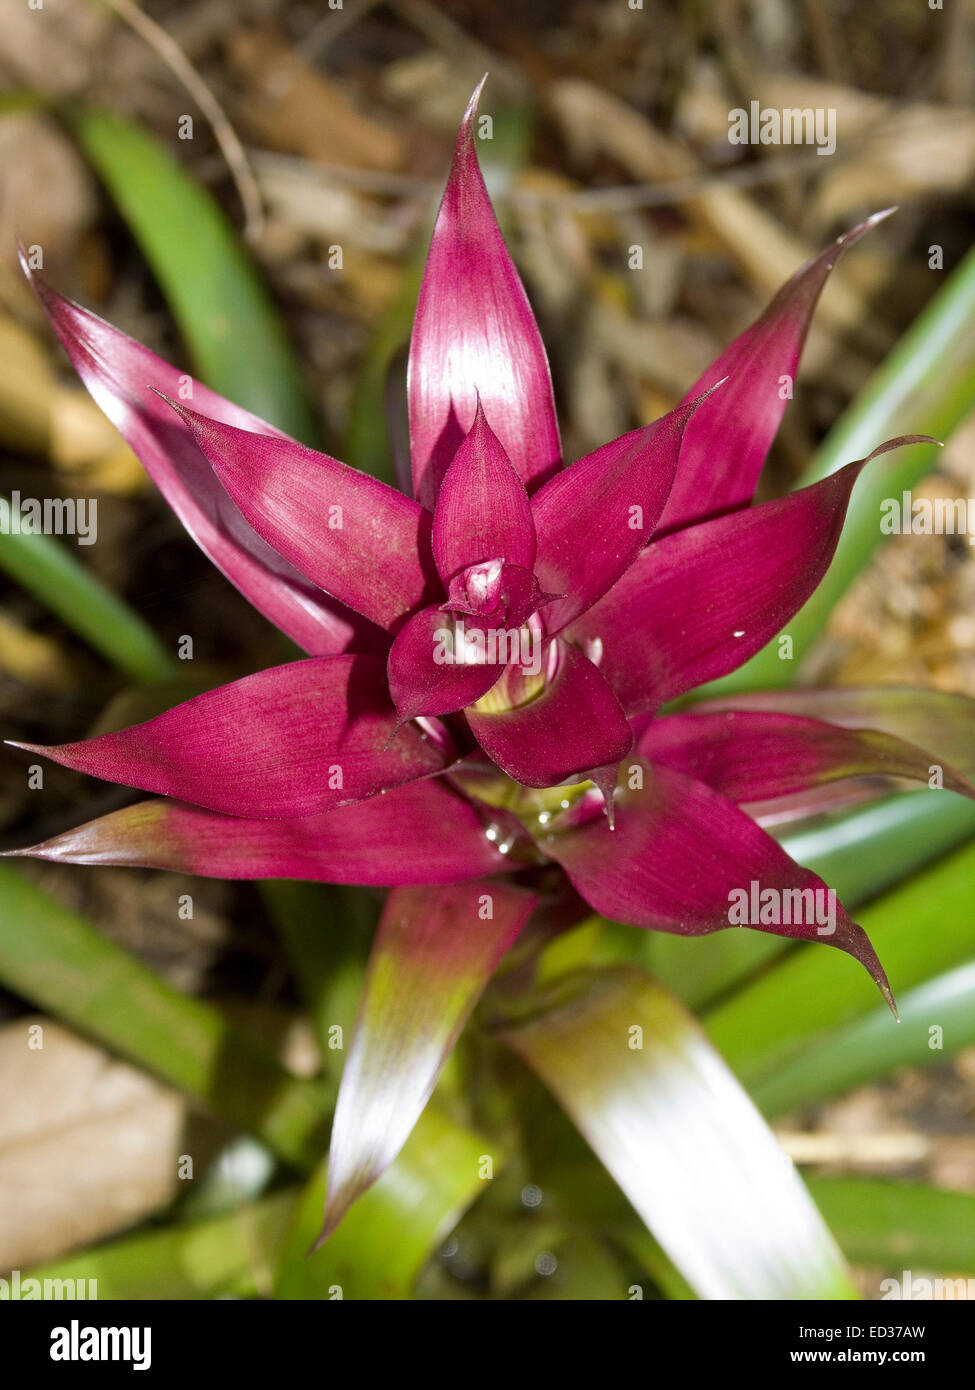 Stunning vivid red / purple bracts & tiny white flower buds surrounded by emerald leaves of bromeliad, Guzmania 'Grand Prix' Stock Photo